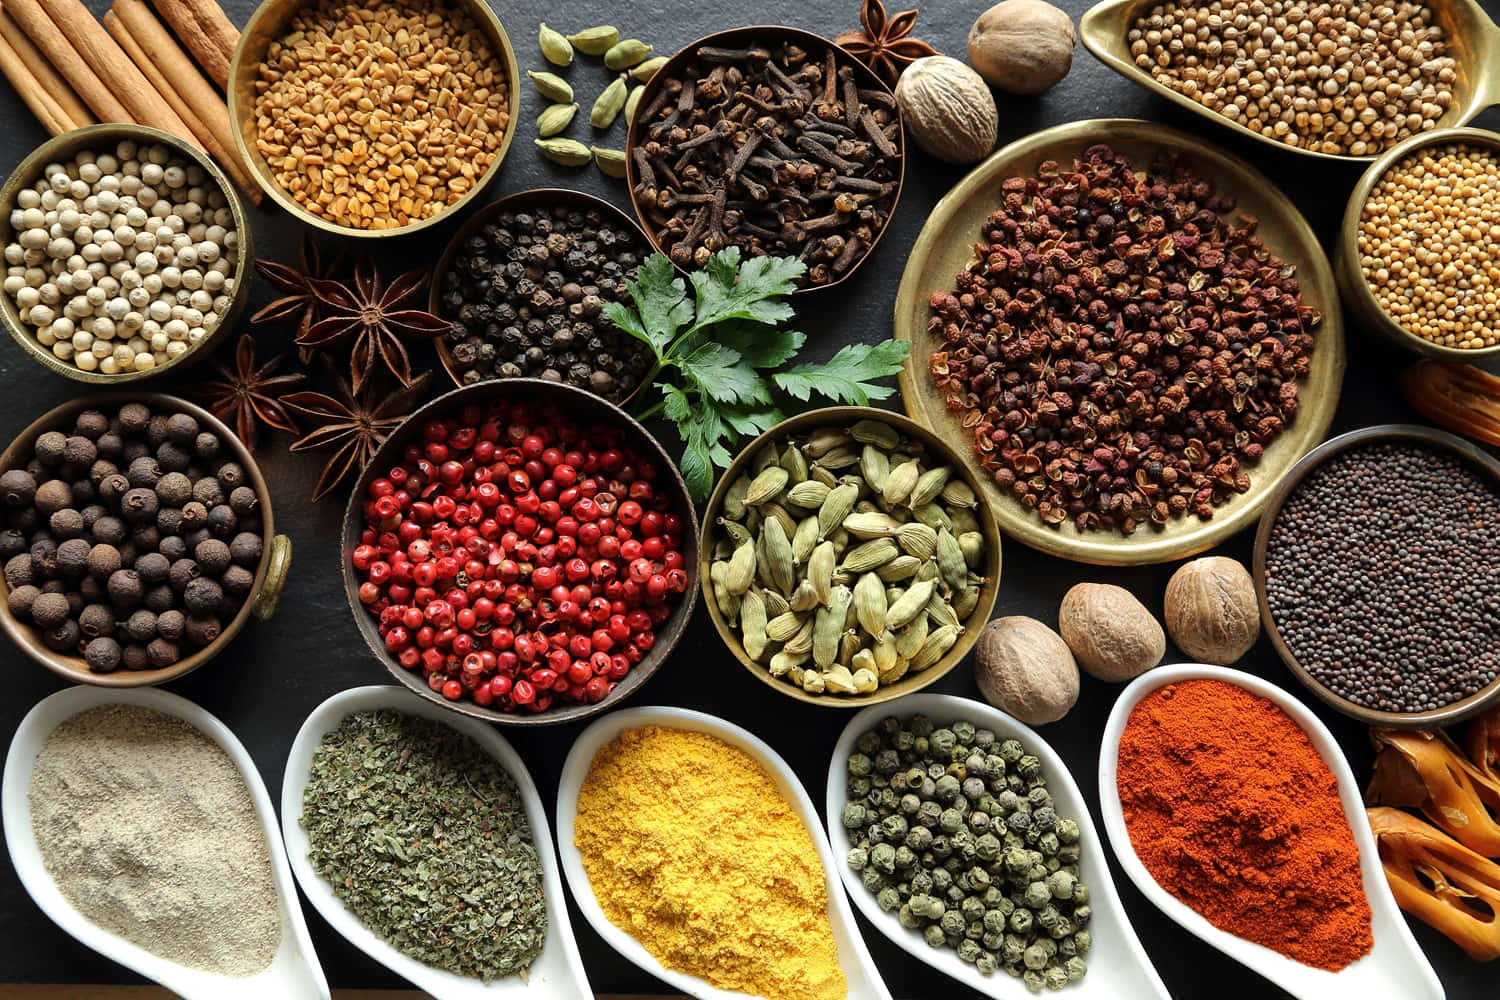 An Assortment of Spices to Add Flavor to Any Meal